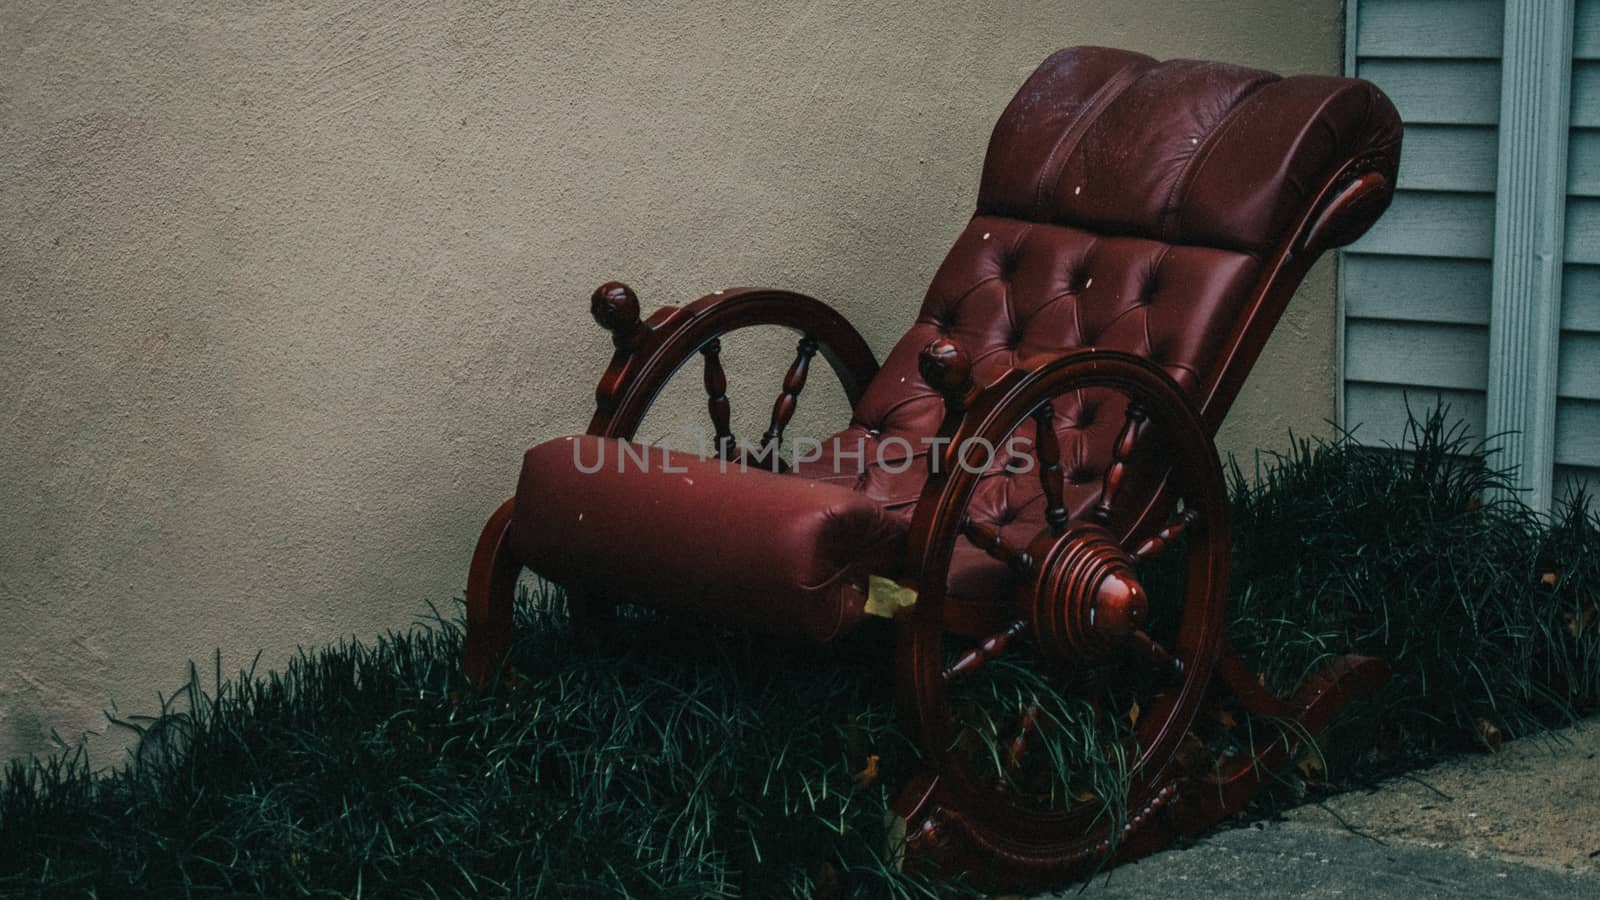 An Old-Fashioned Red Rocking Chair Sitting in a Patch of Grass N by bju12290